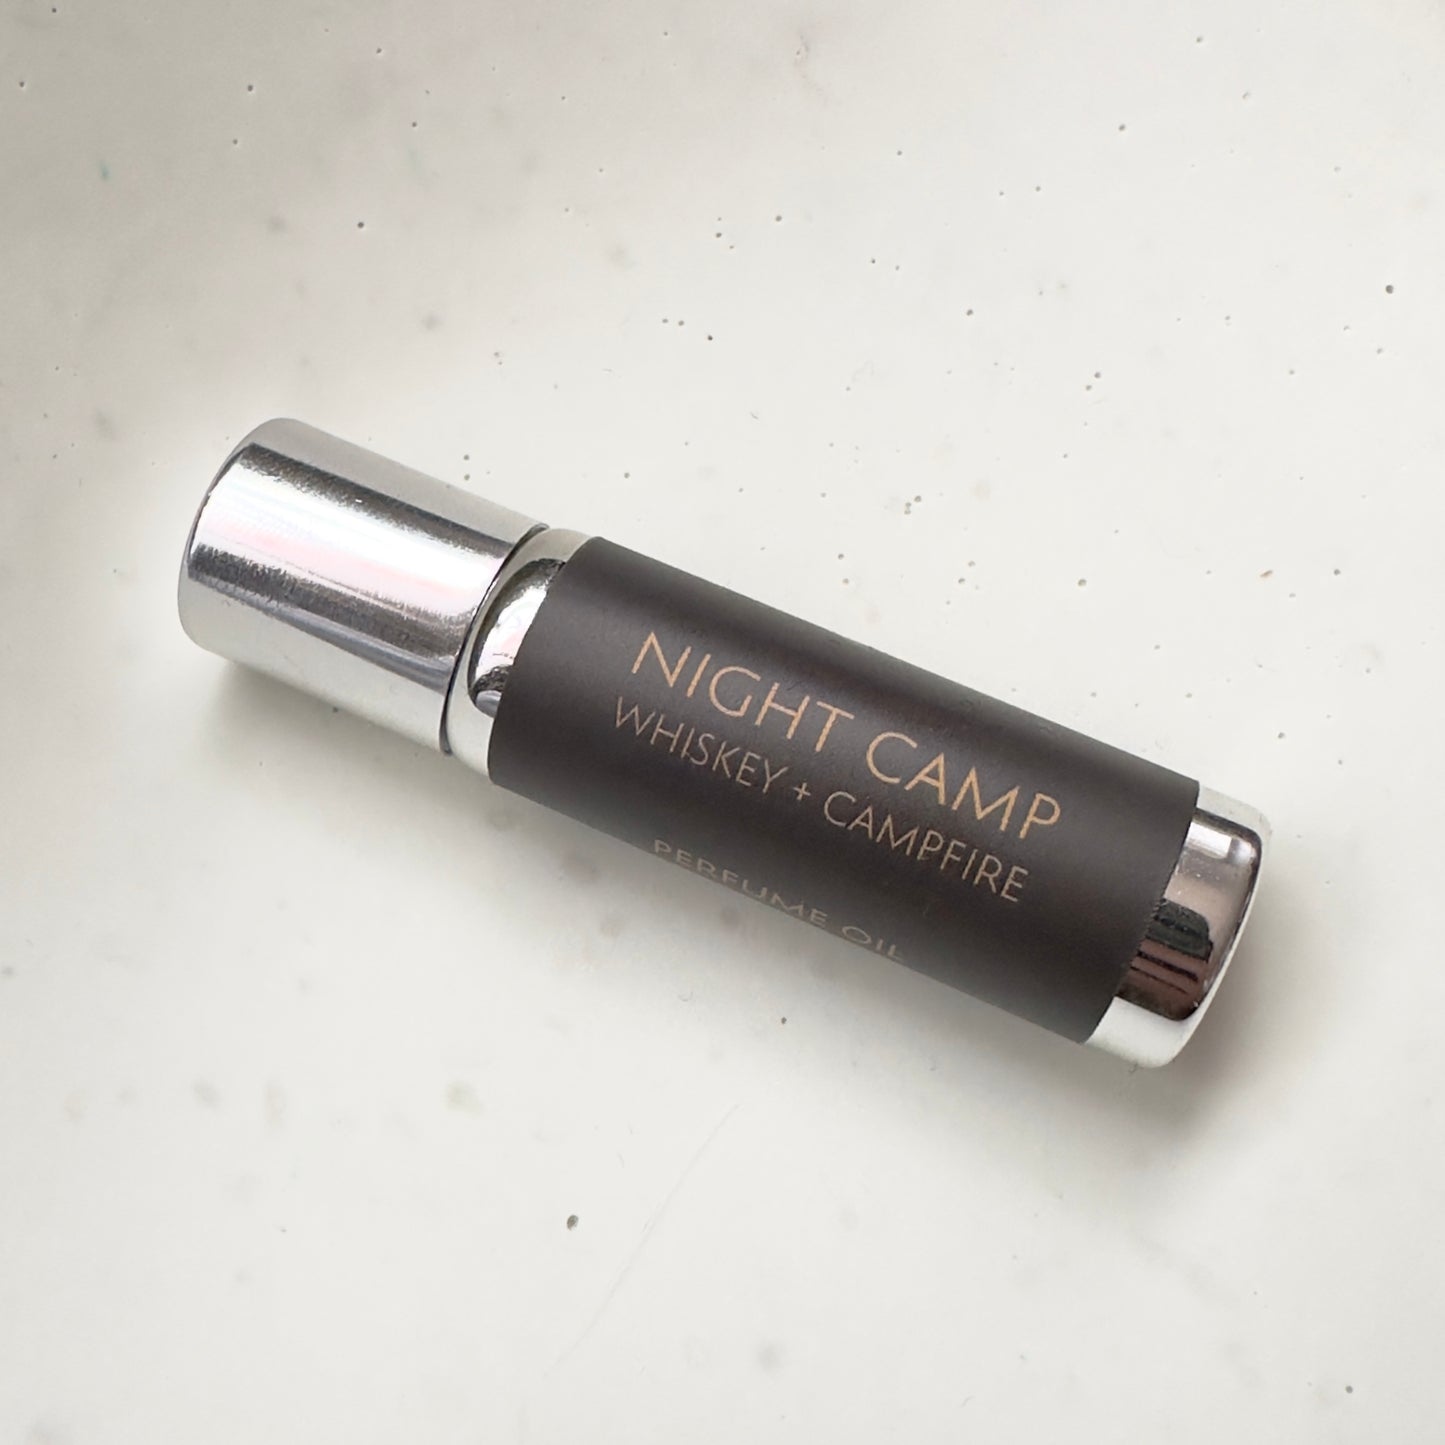 Perfume Oil Roll-On | Night Camp | Whiskey, Oak, Wood Smoke + Cider Notes